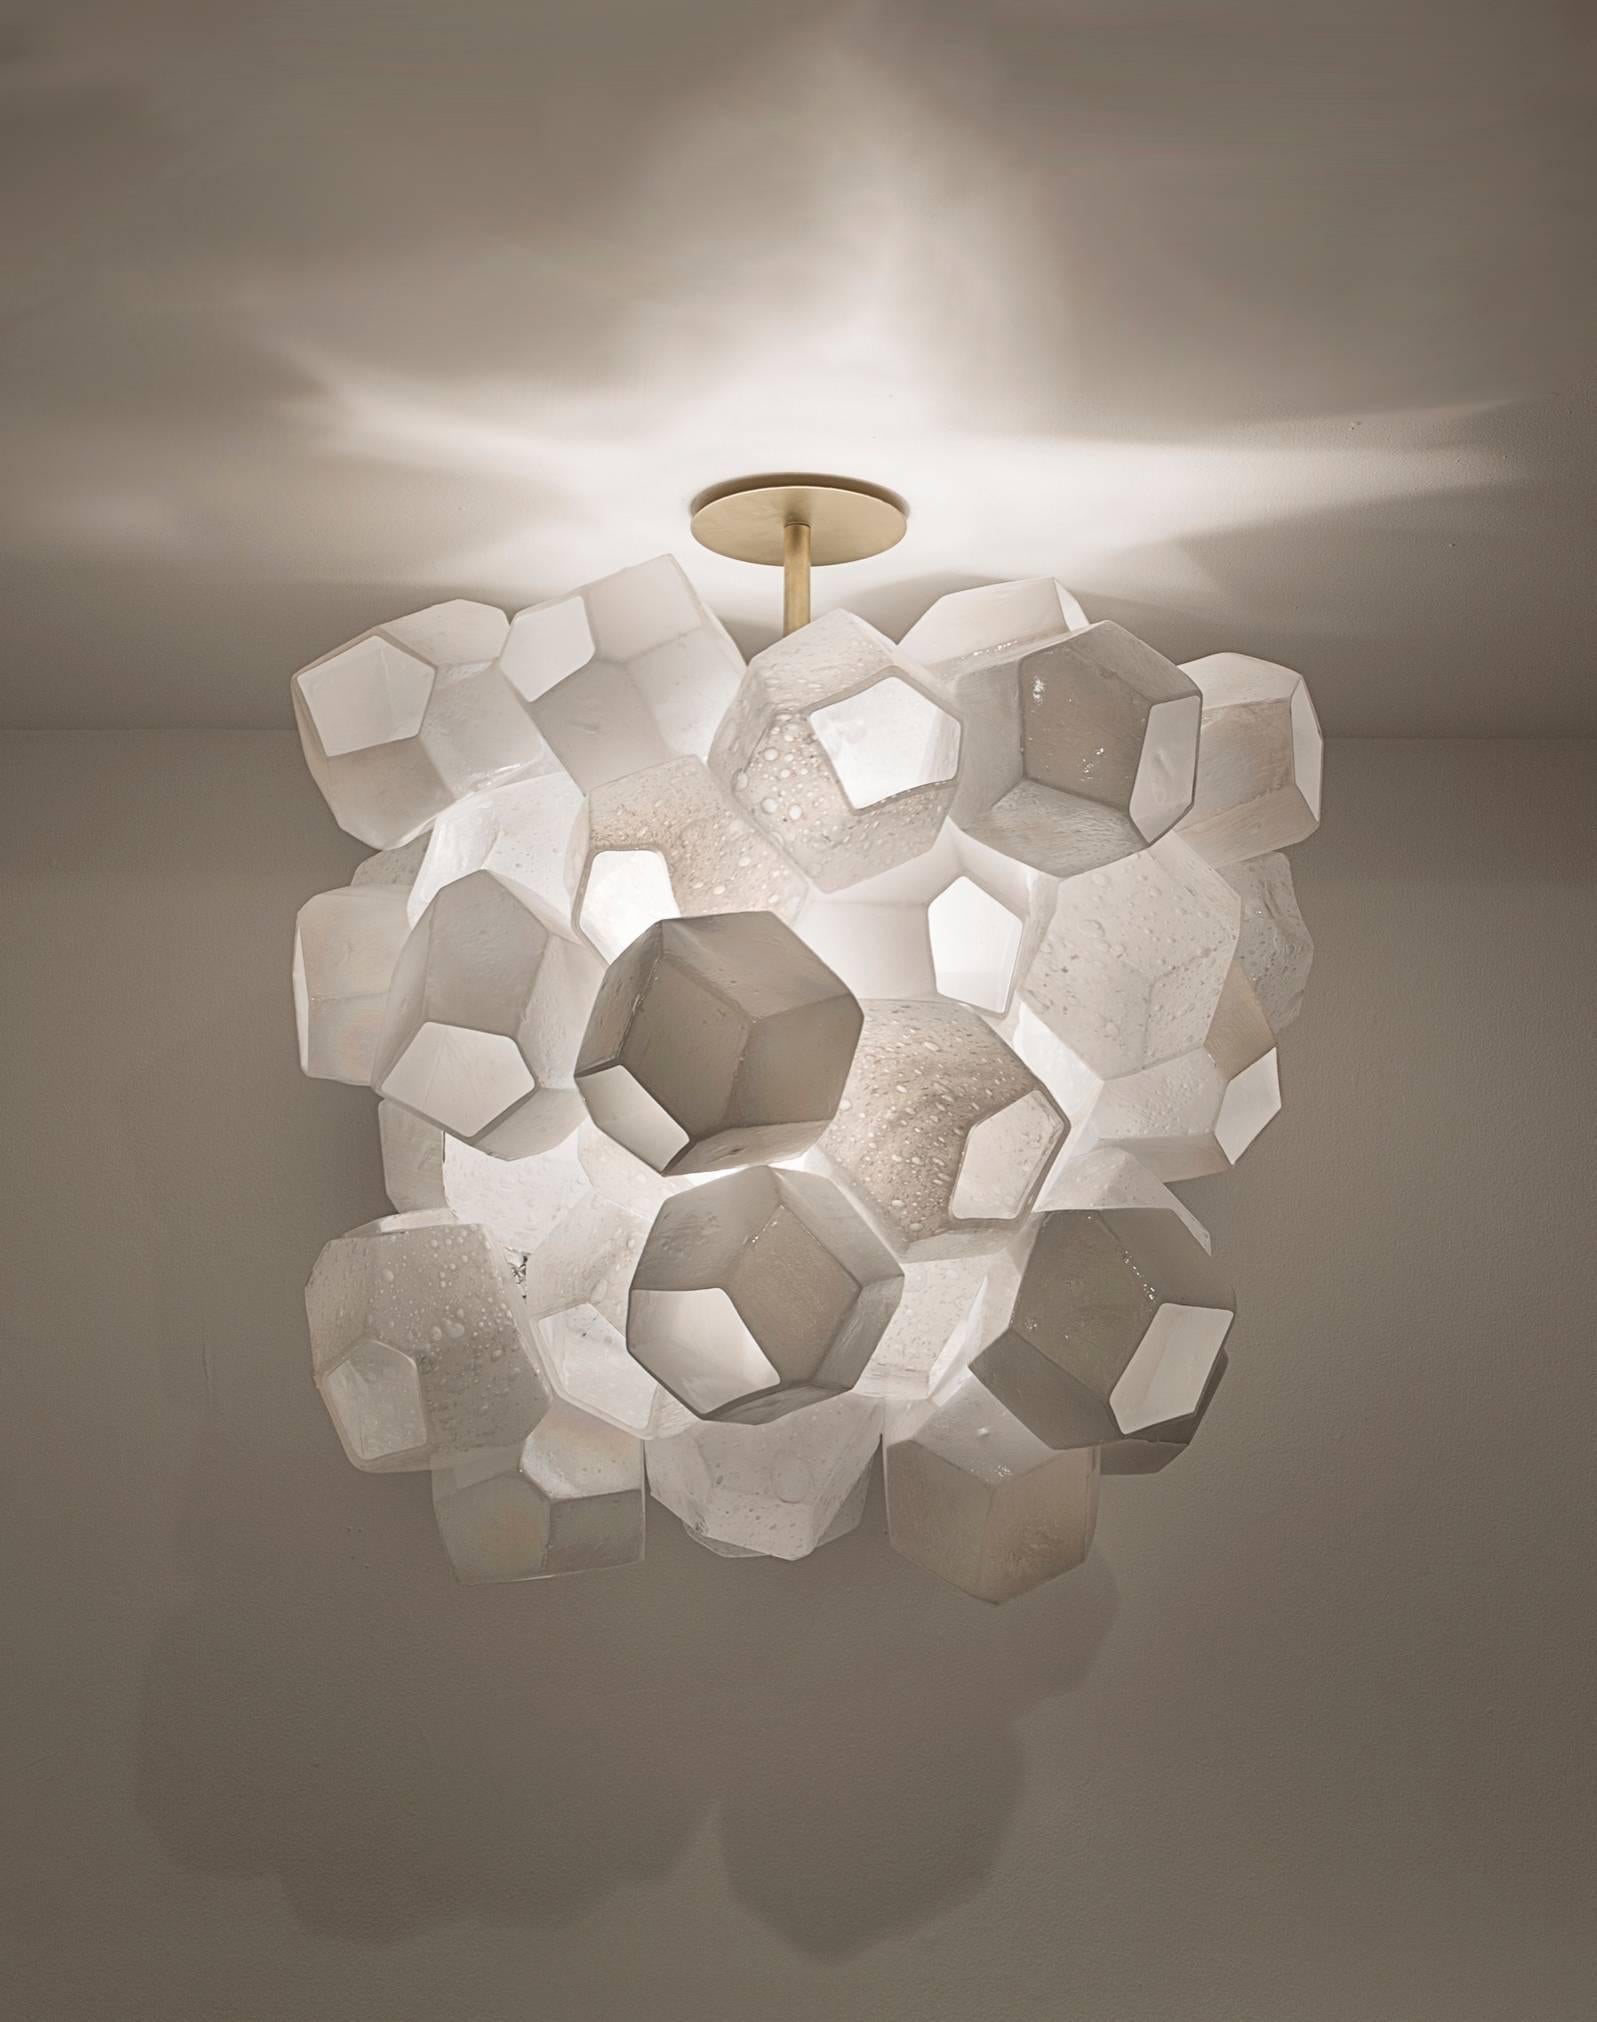 Illuminated faceted cluster sculpture. Designed and made by Jeff Zimmerman, New York, 2015.